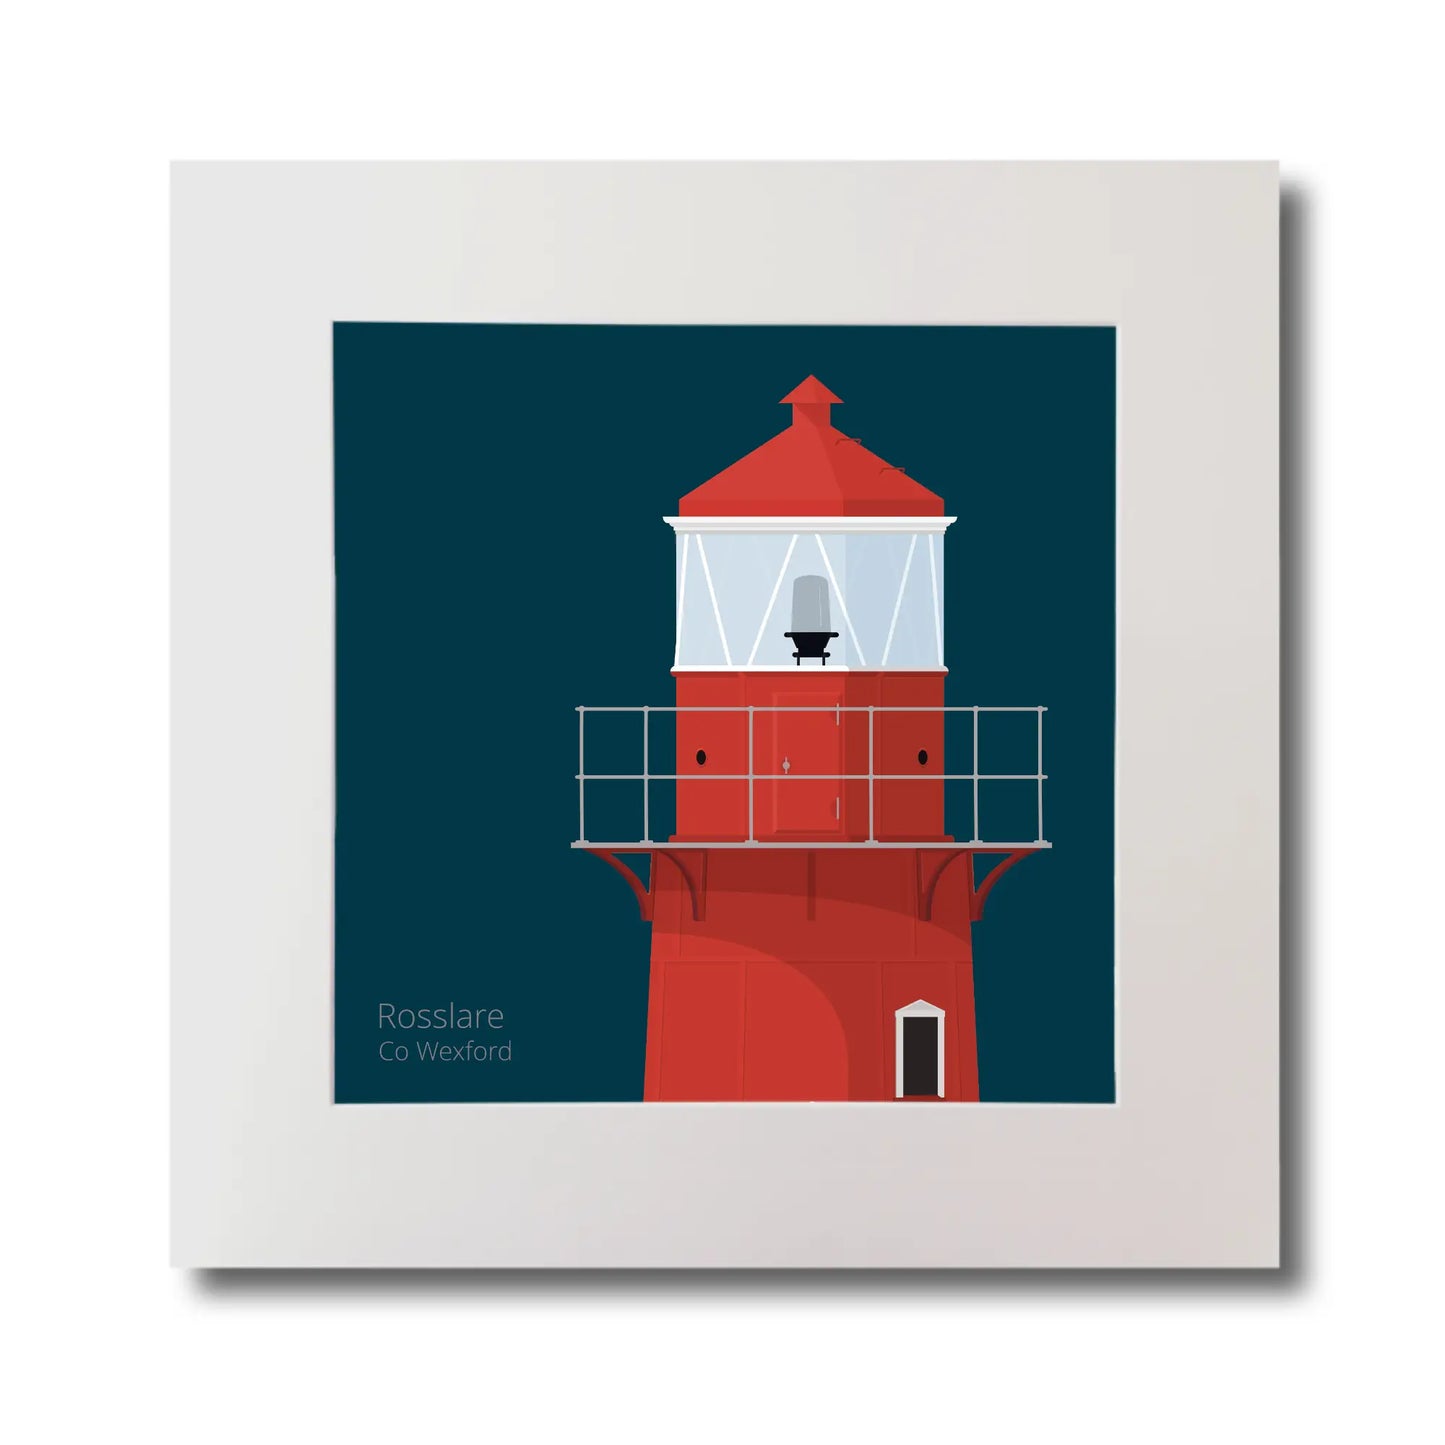 Illustration of Rosslare Harbour lighthouse on a midnight blue background, mounted and measuring 30x30cm.